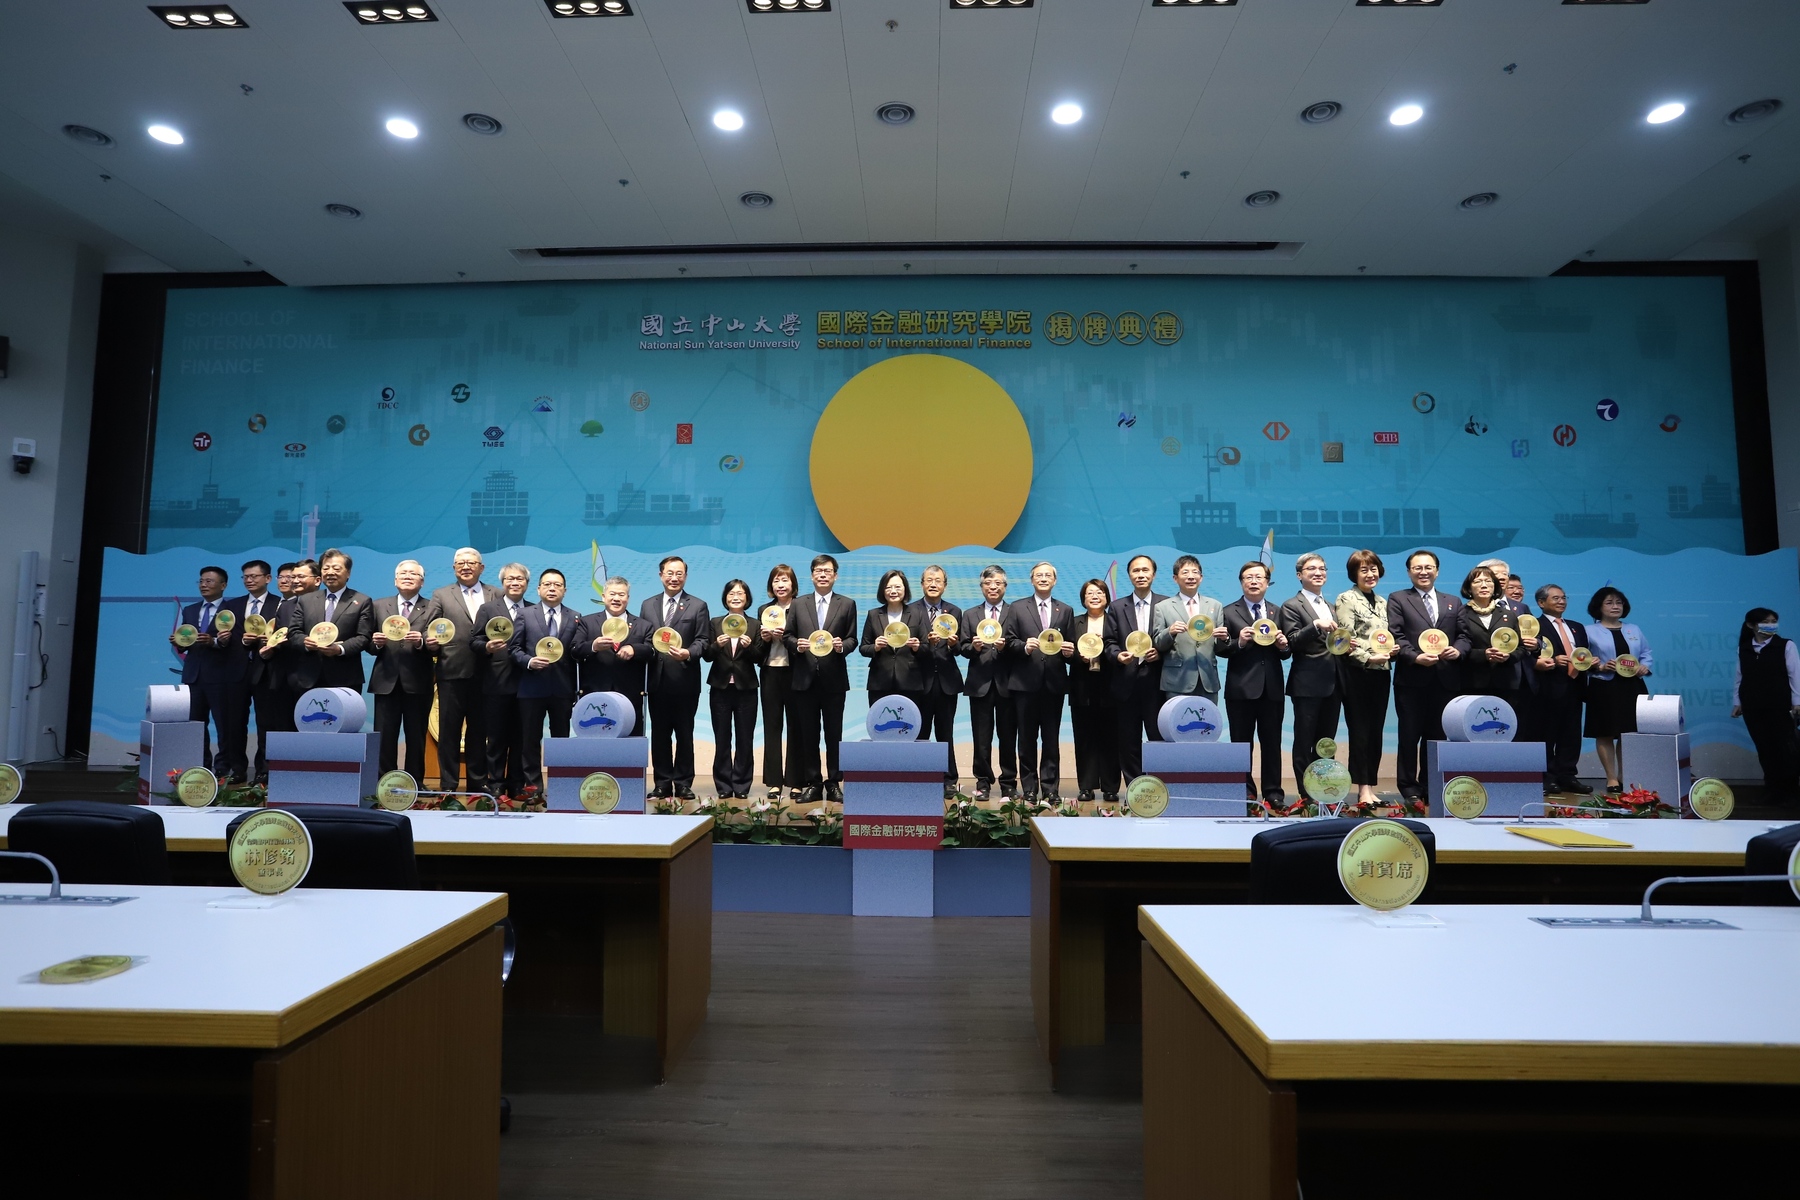 Inauguration ceremony of the School of International Finance. The stage design imitates the features of Sizihwan Bay including its beautiful sunsets, and incorporates gold coins as a decorative element, symbolizing the cooperation between industry, academia, and government in forming a team of finance professionals for Taiwan, reaching a new milestone.